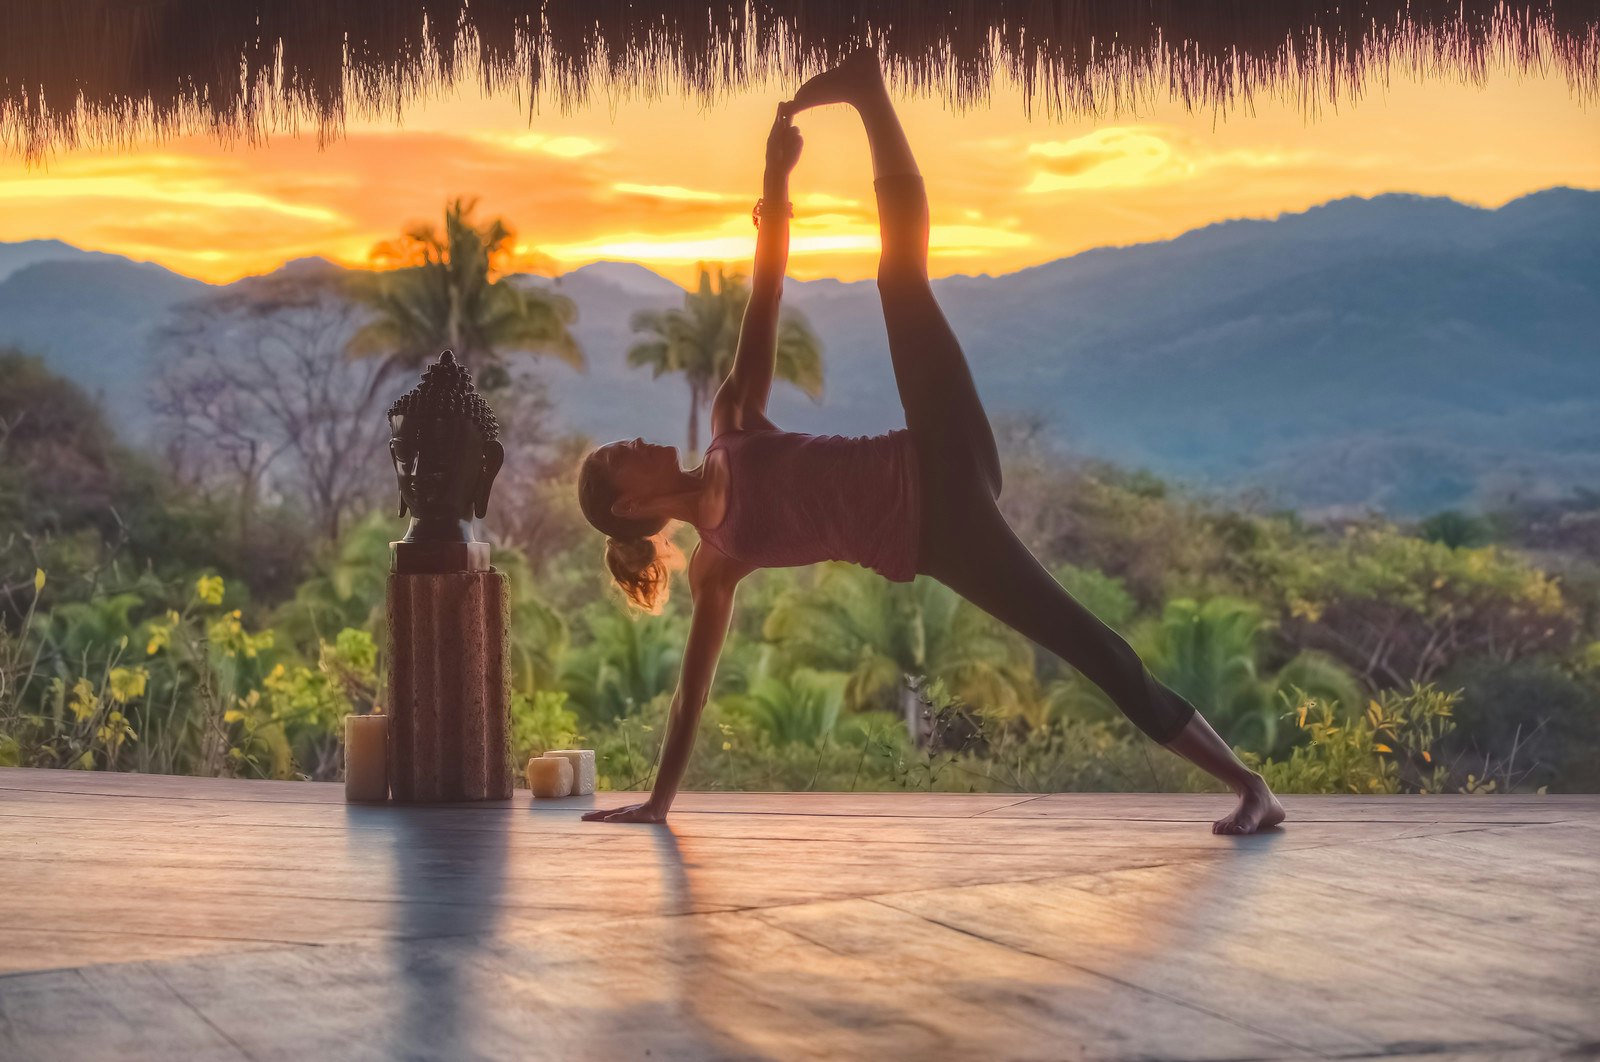 A woman is in a challenging yoga pose at luxury retreat. She is in an open-air yoga studio; behind her are lush tropical plants and trees, and in the distance are mountains with the sun setting behind.